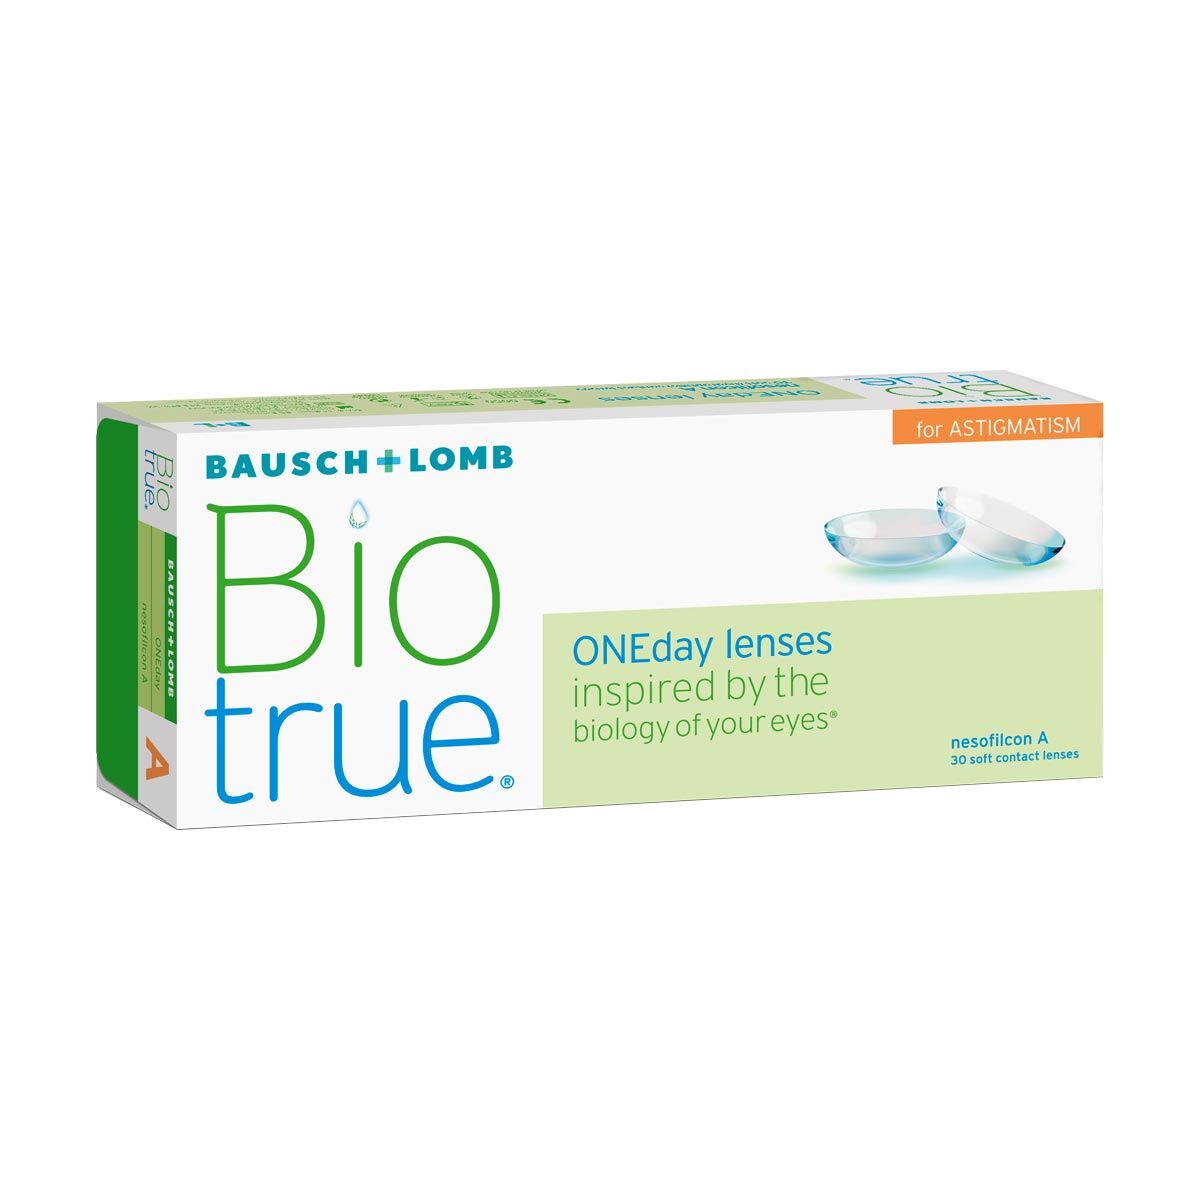 Bausch & Lomb Biotrue One Day for Astigmatism (30 Contact Lenses), Bausch & Lomb, Daily Lenses, Nesofilcon A